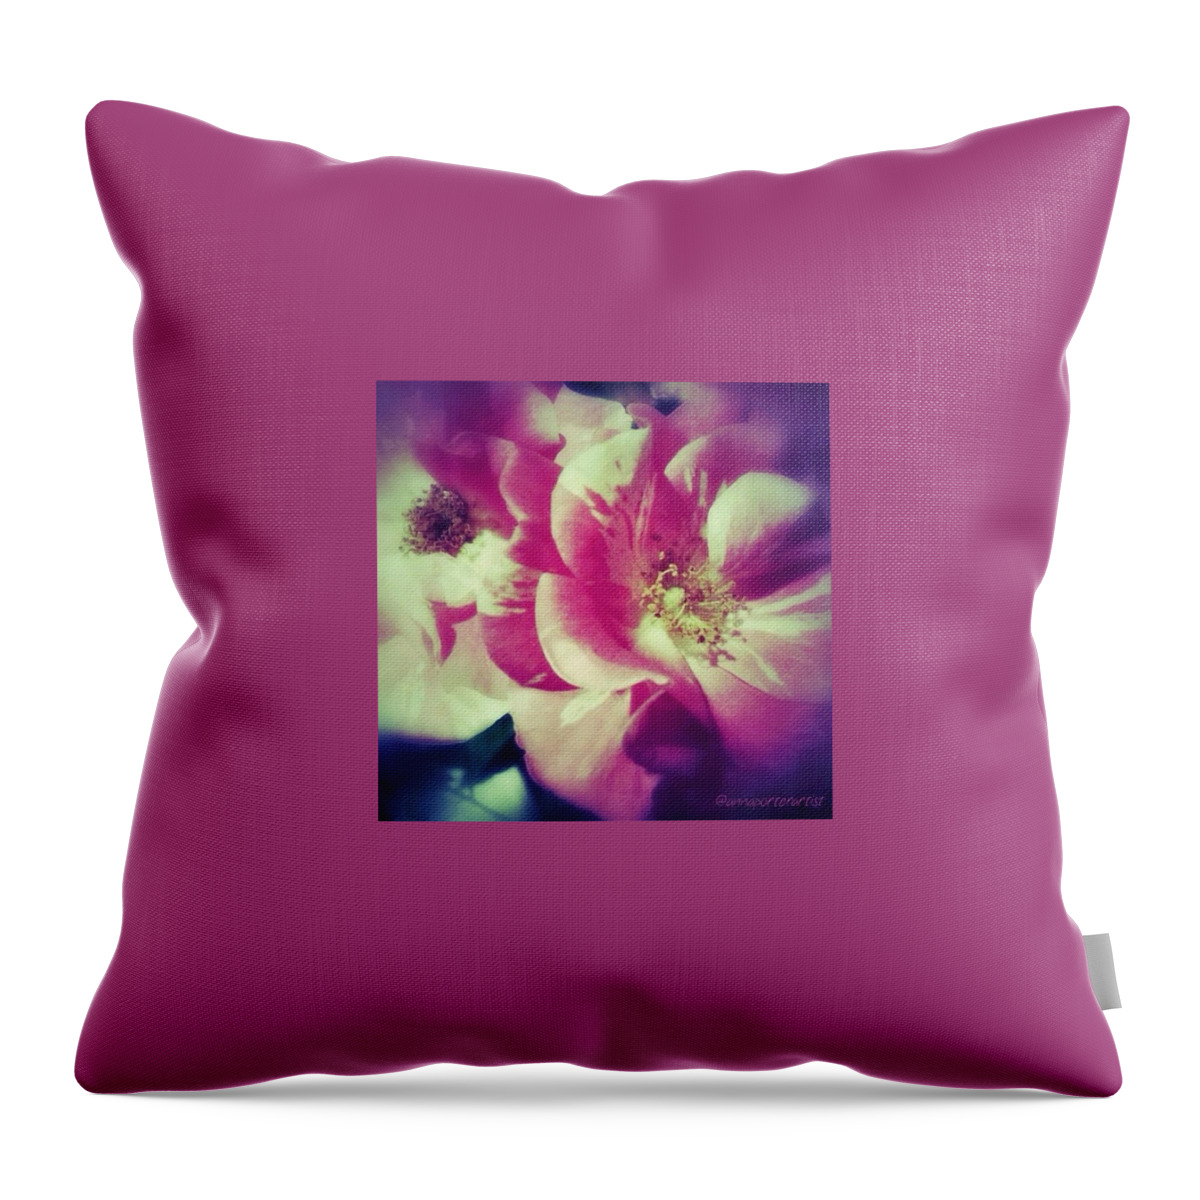 Annasgardens Throw Pillow featuring the photograph A Difference Of Opinion, Photo By by Anna Porter